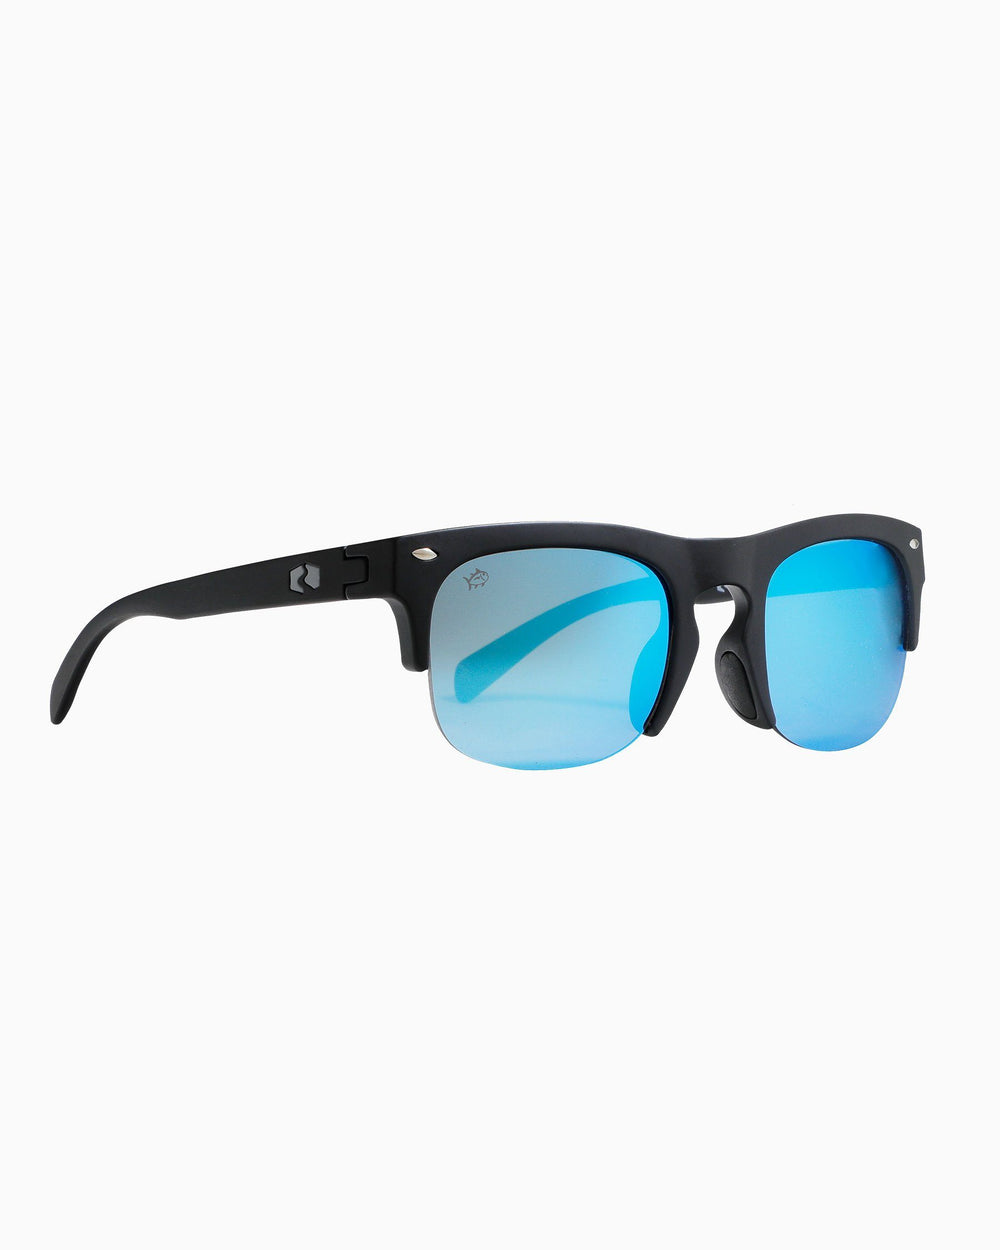 The side of the Men's Rheos Sullivans Sunglasses by Southern Tide - Gunmetal Marine